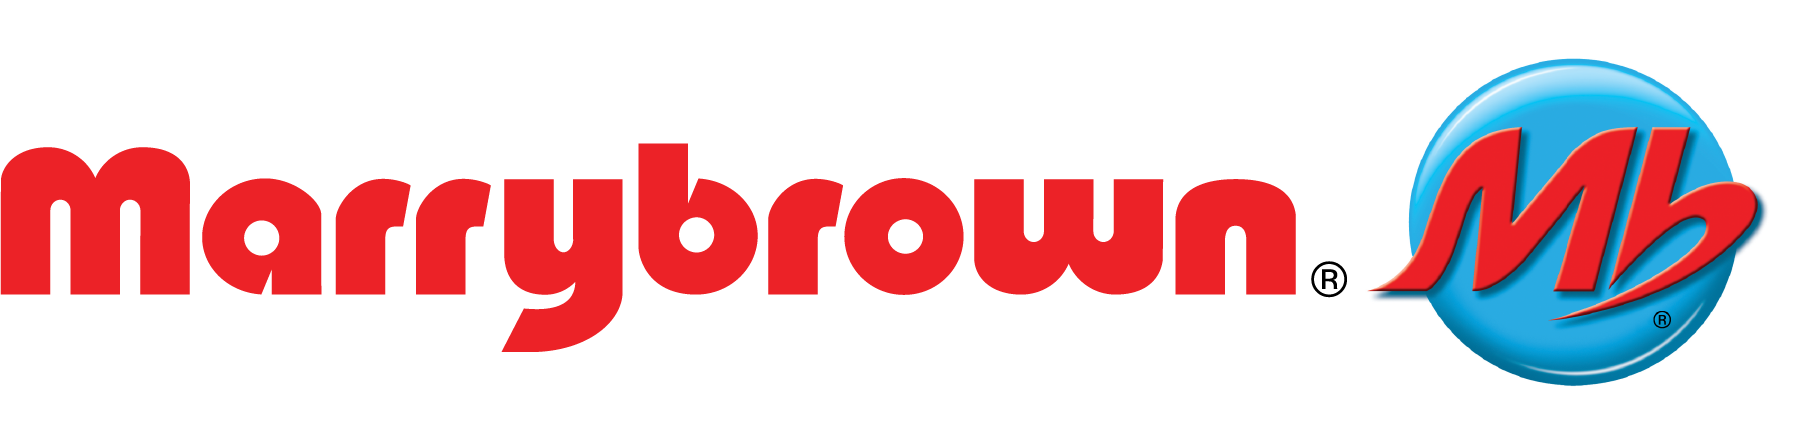 marry brown logo